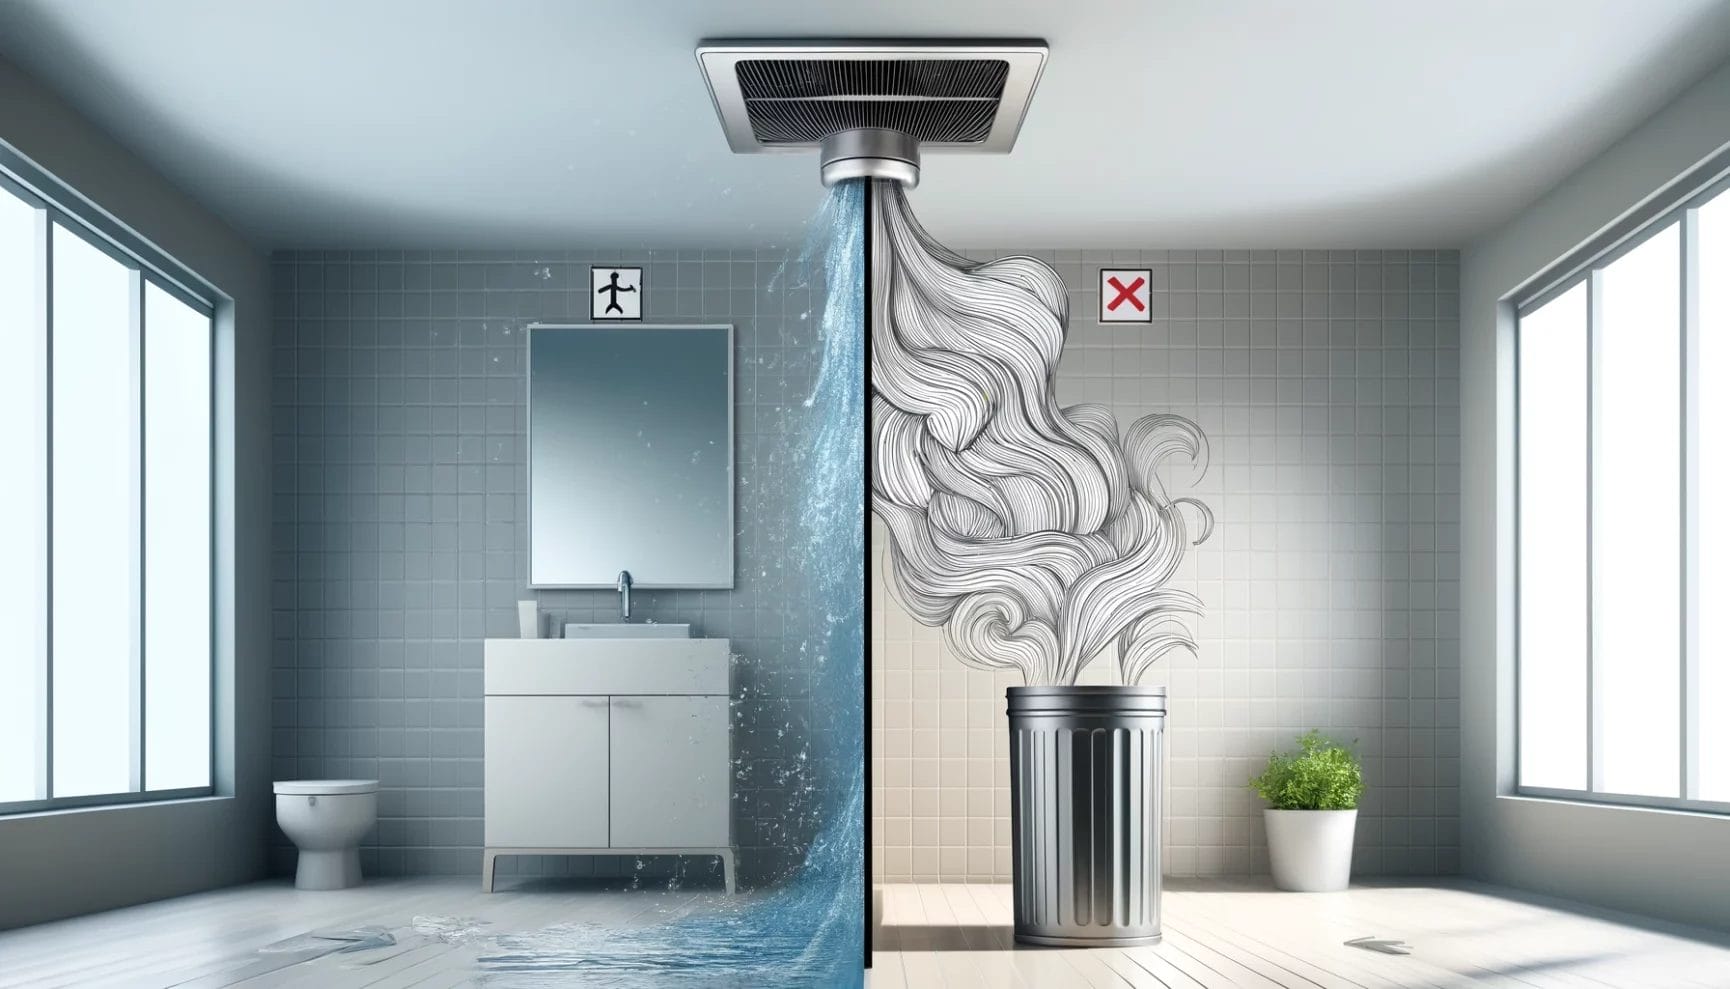 A surreal image of water flowing artistically from a showerhead into a trash can in a modern bathroom setting.